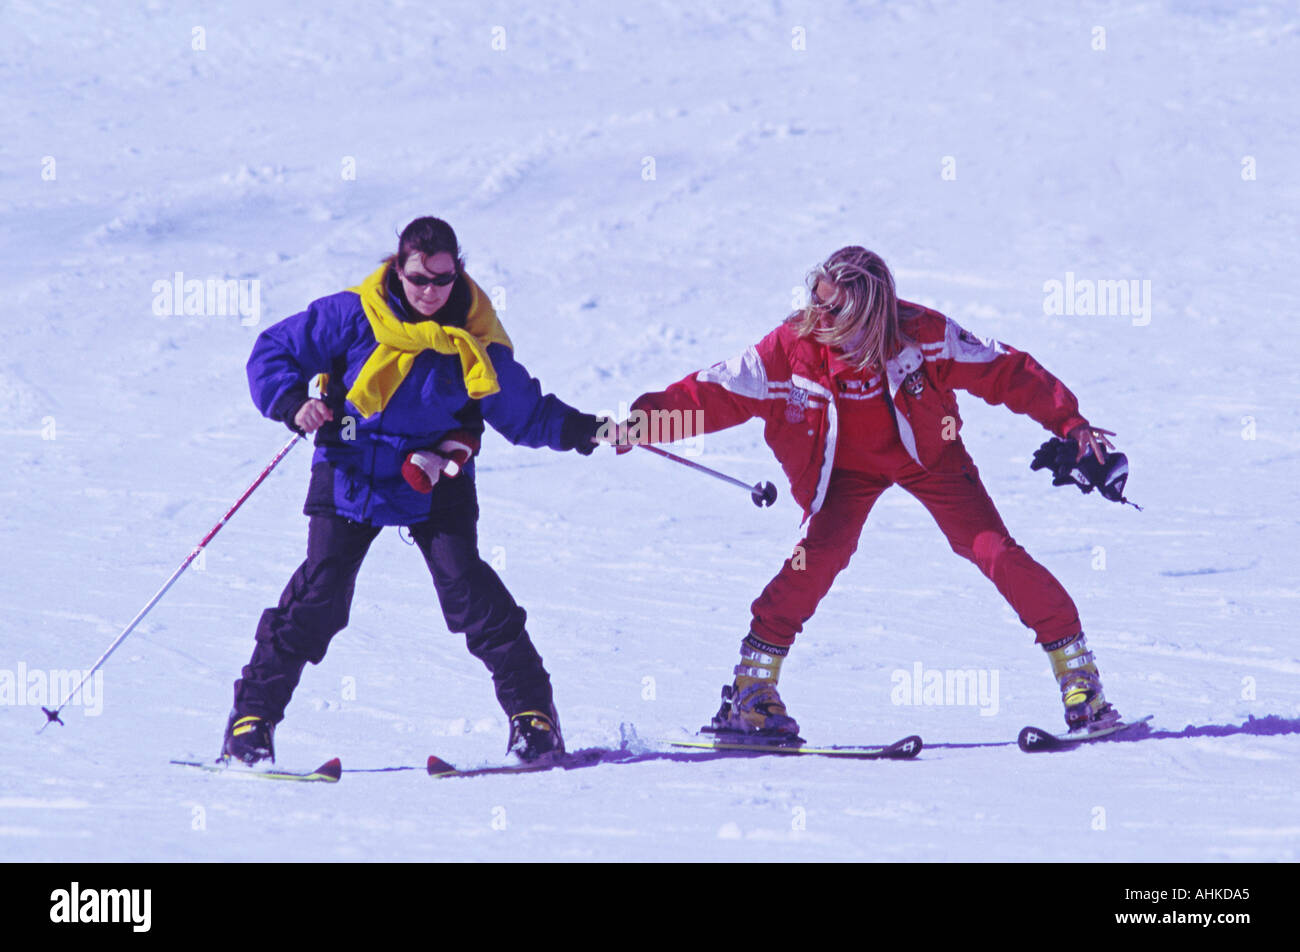 A ski instructor gives a ski lesson at the resort of Sestriere, Italy. Stock Photo